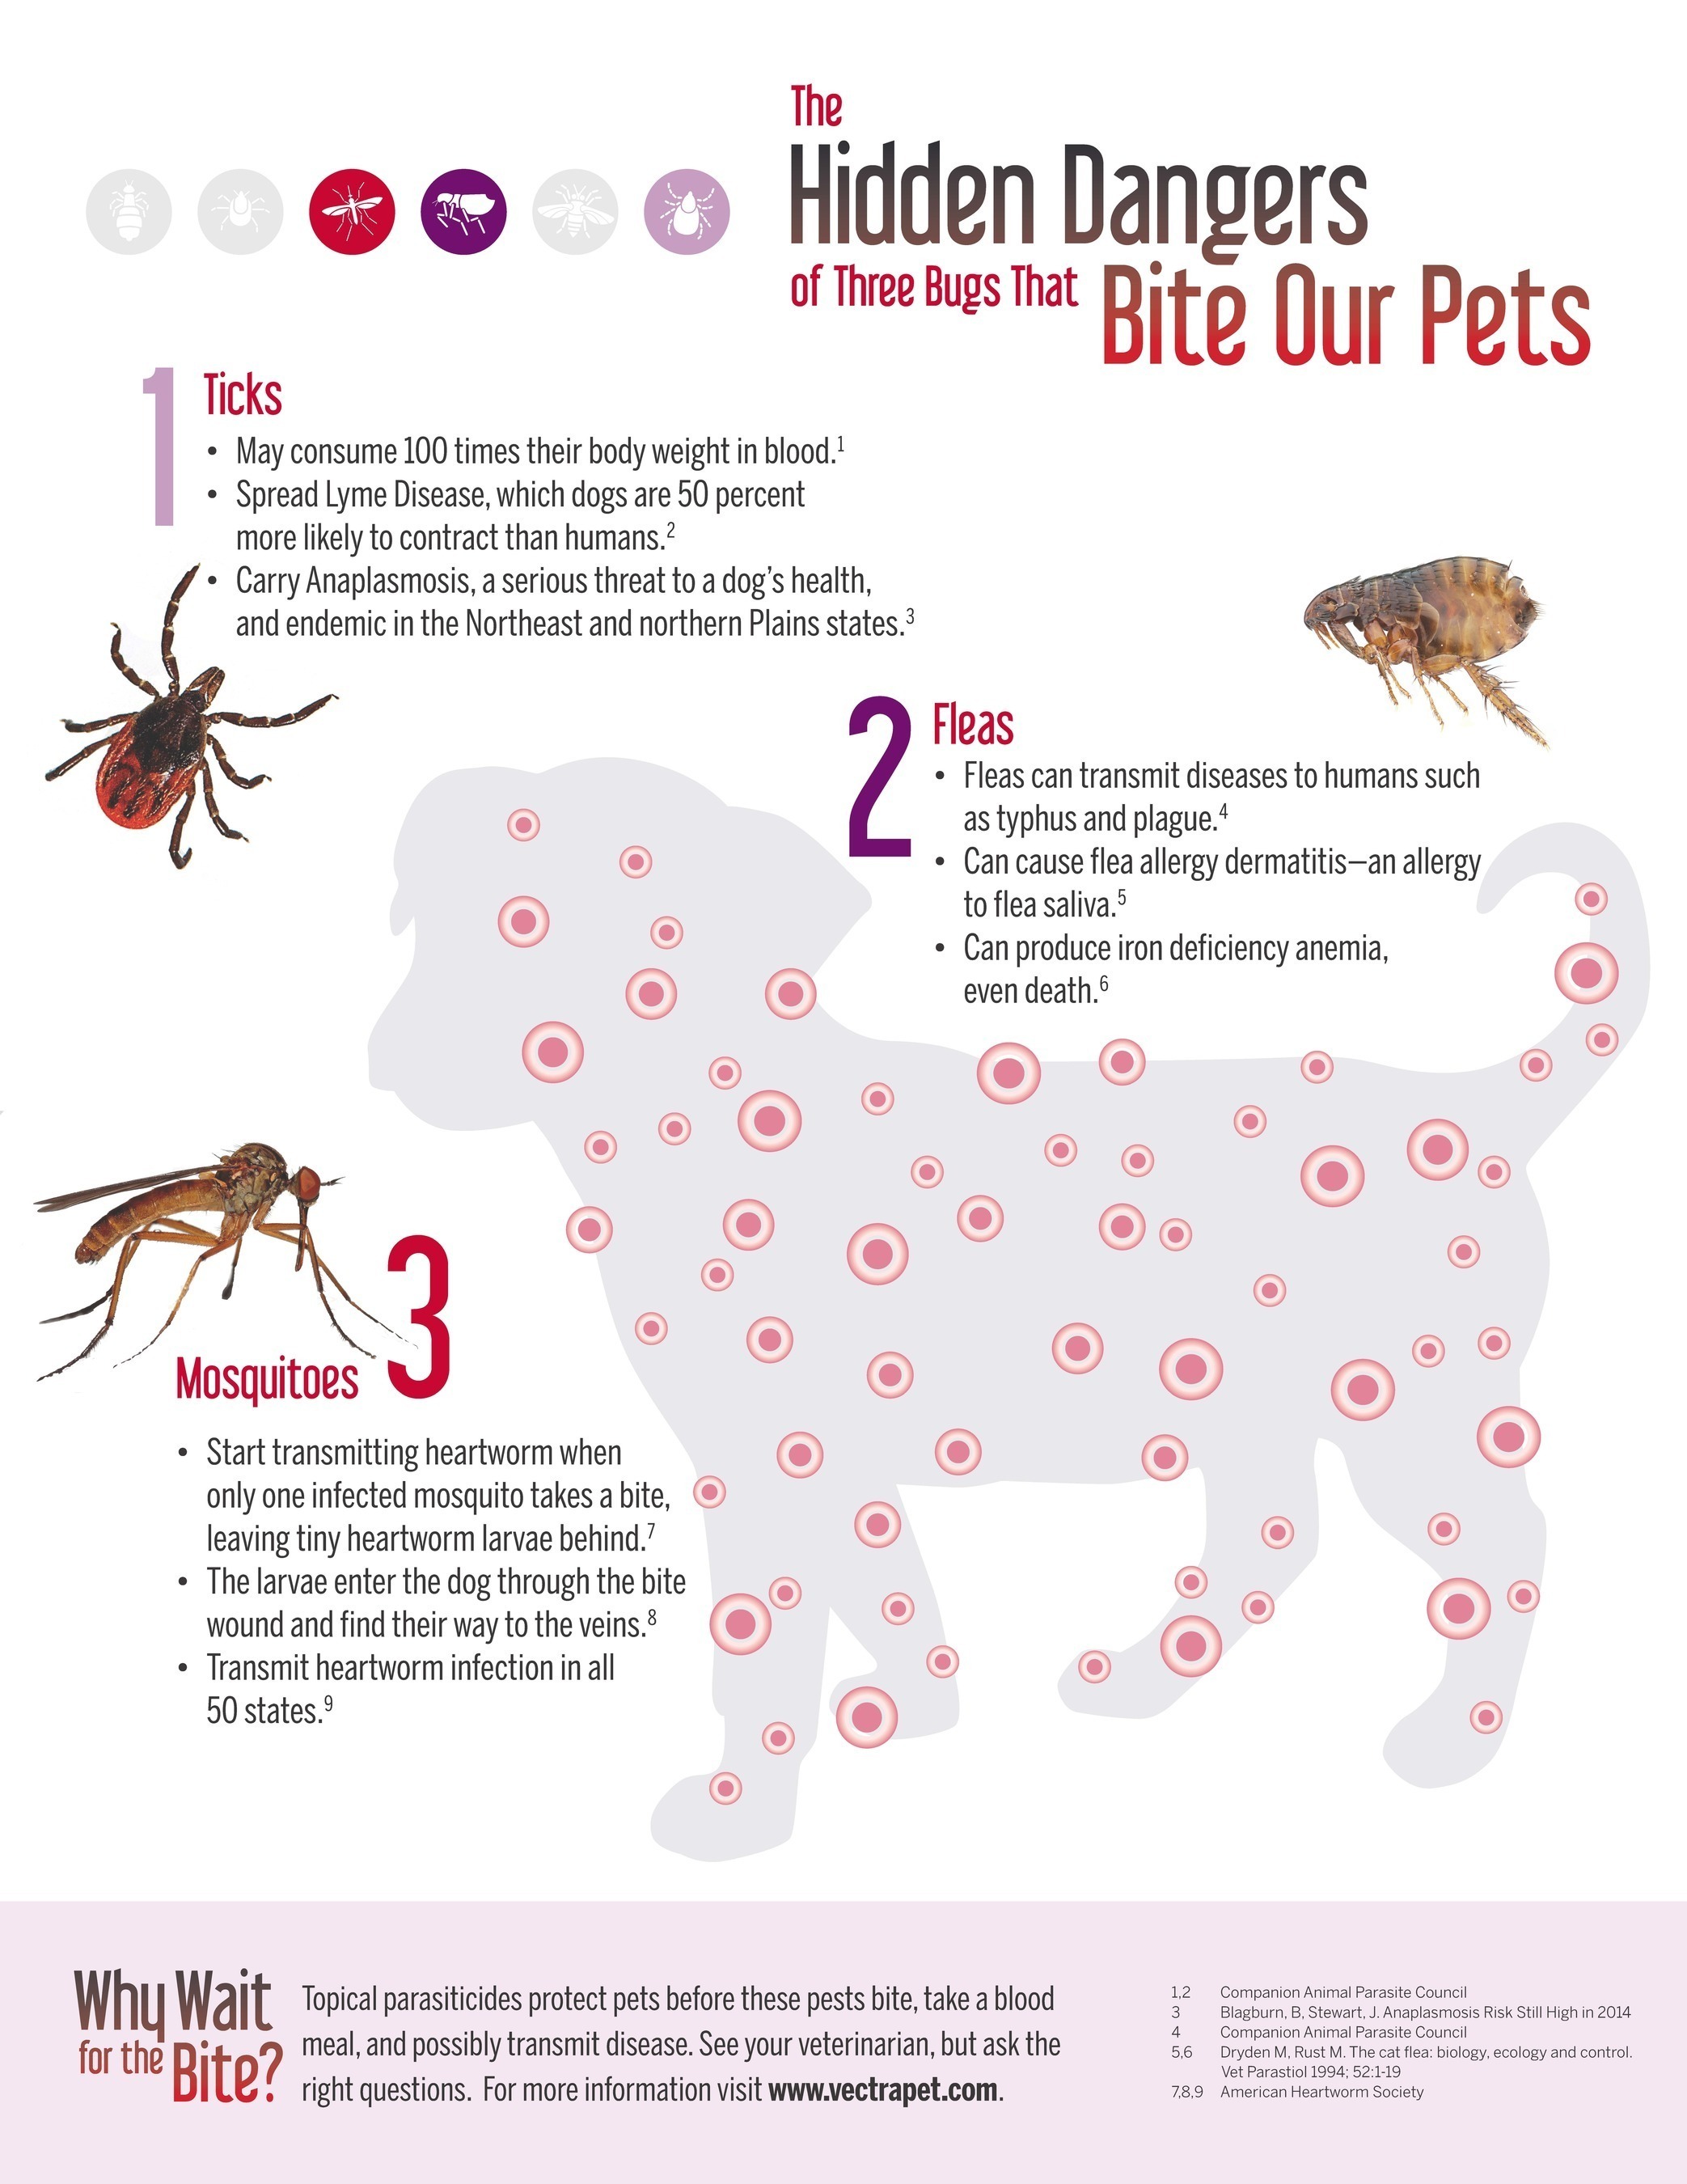 Why Wait for the Bite is a campaign to educate pet parents about the dangers of bug bites and how to protect their pets. A new survey shows by a nearly 9-1 margin, dog owners prefer topical medications squeezed from a tube to protect their pet before the bug bites vs. beef-flavored oral treats that only kill fleas and ticks after these pests bite and feed on the blood of their dogs. See your veterinarian and learn more about how to protect your pet at  www.vectrapet.com . (PRNewsFoto/Ceva Animal Health) (PRNewsFoto/Ceva Animal Health)